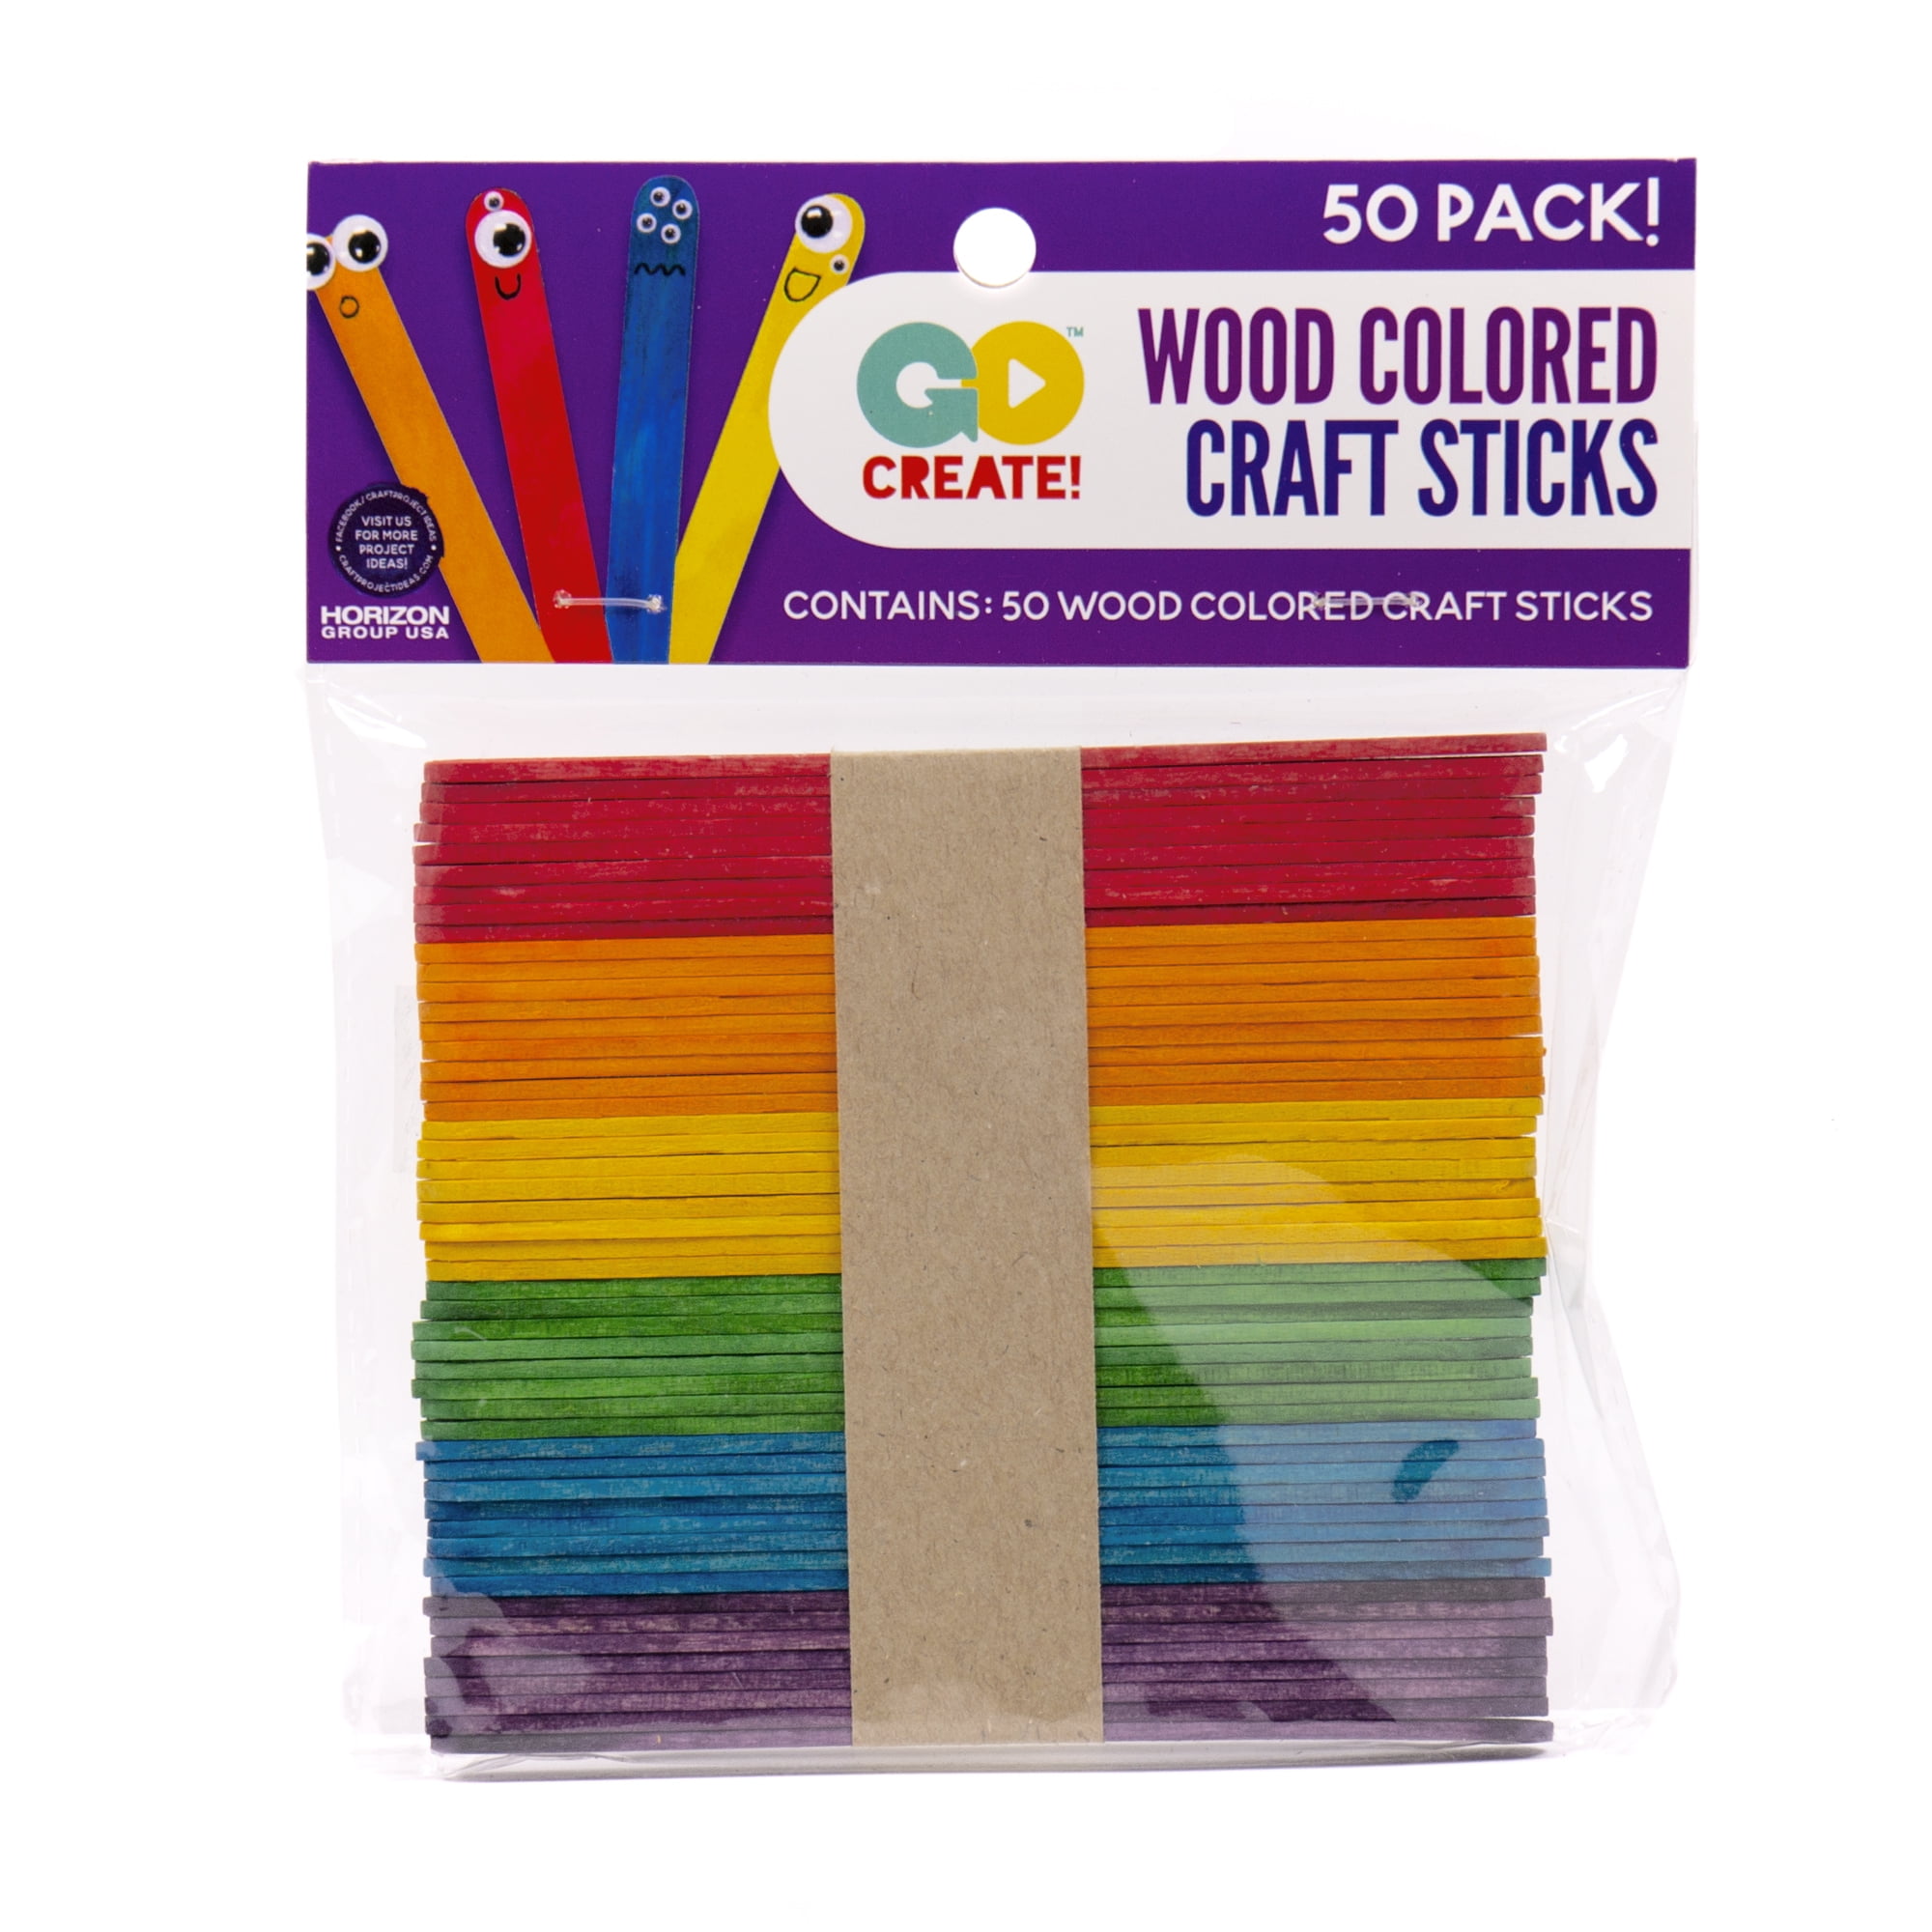  1800 PCS Colored Popsicle Sticks, 4.5 Inch, Rainbow Colored  Wood Craft Sticks, Popsicle Sticks for Crafts, Art Supplies, DIY Craft  Creative Designs, by GNIEMCKIN. : Arts, Crafts & Sewing